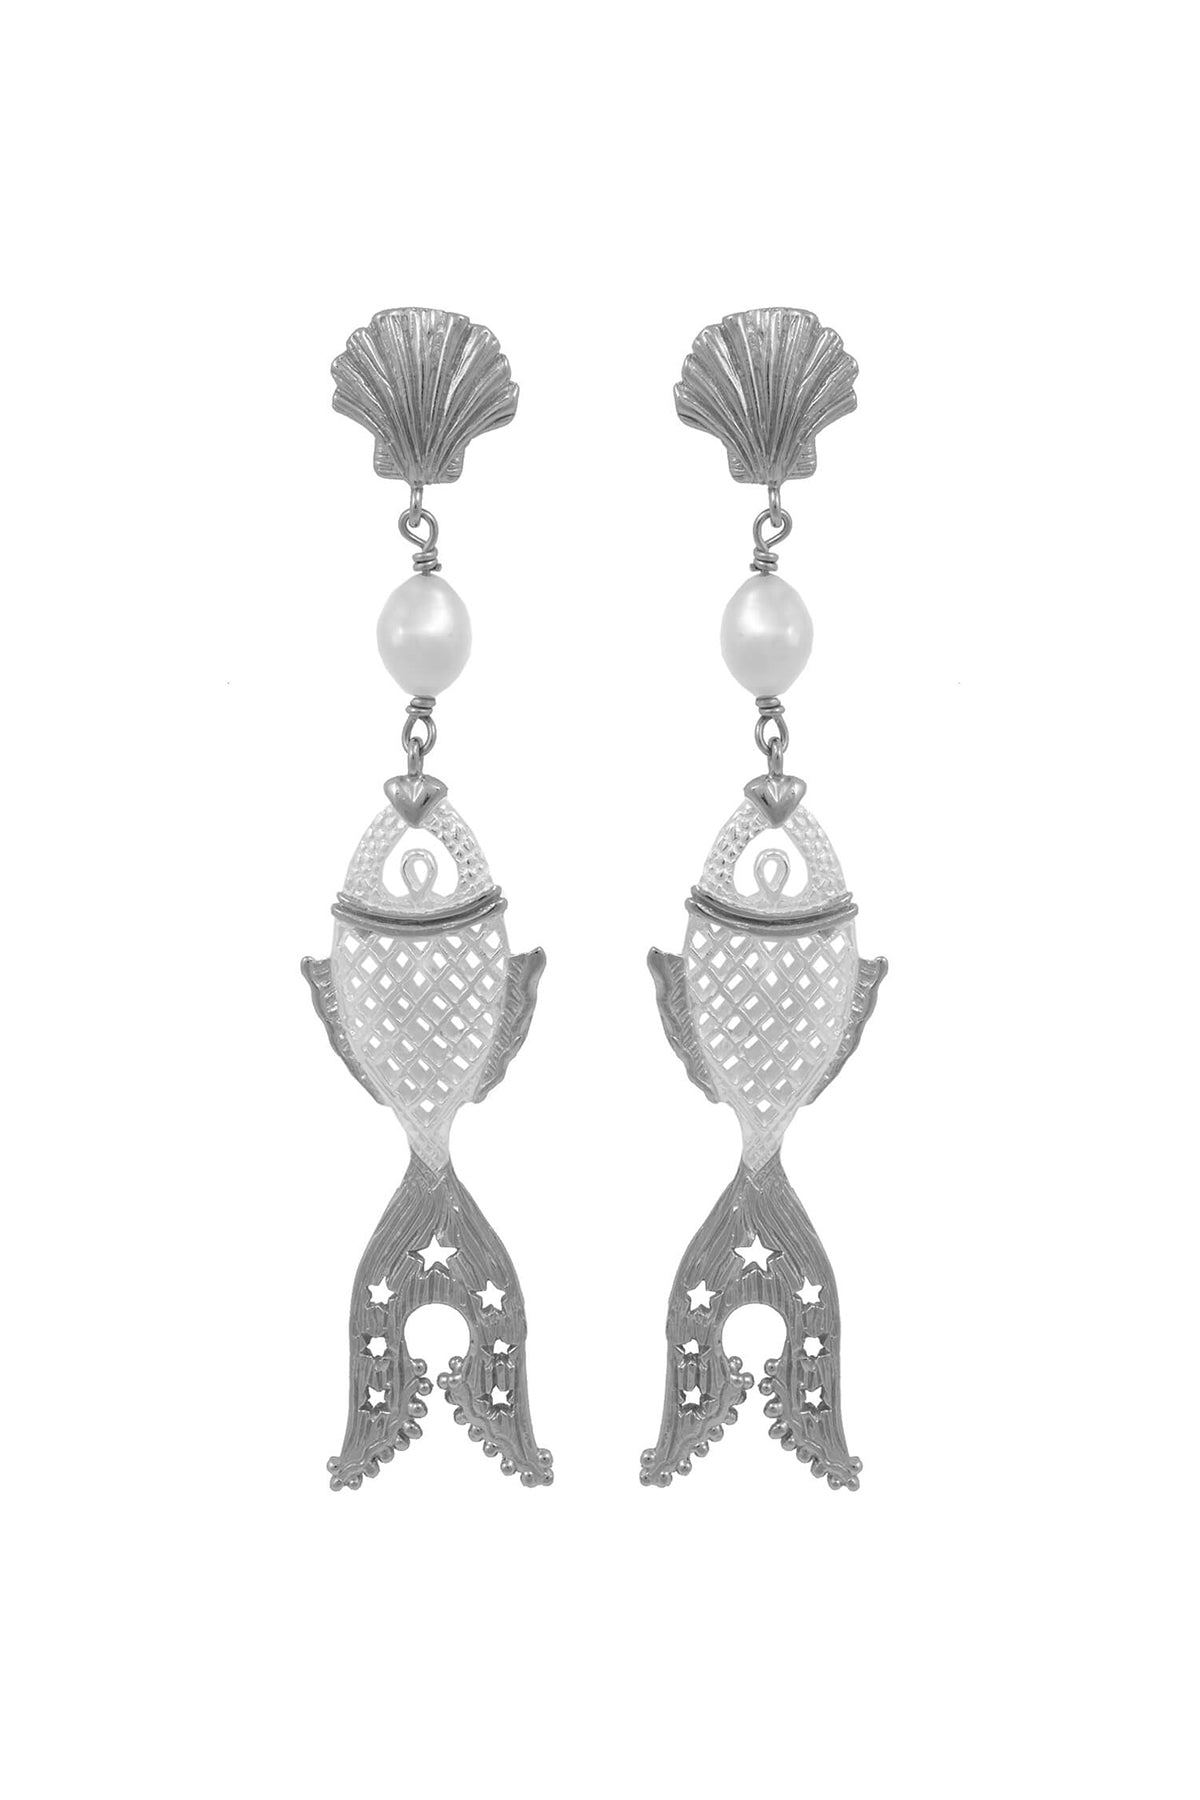 Golden fish with clam and pearl earrings. Silver